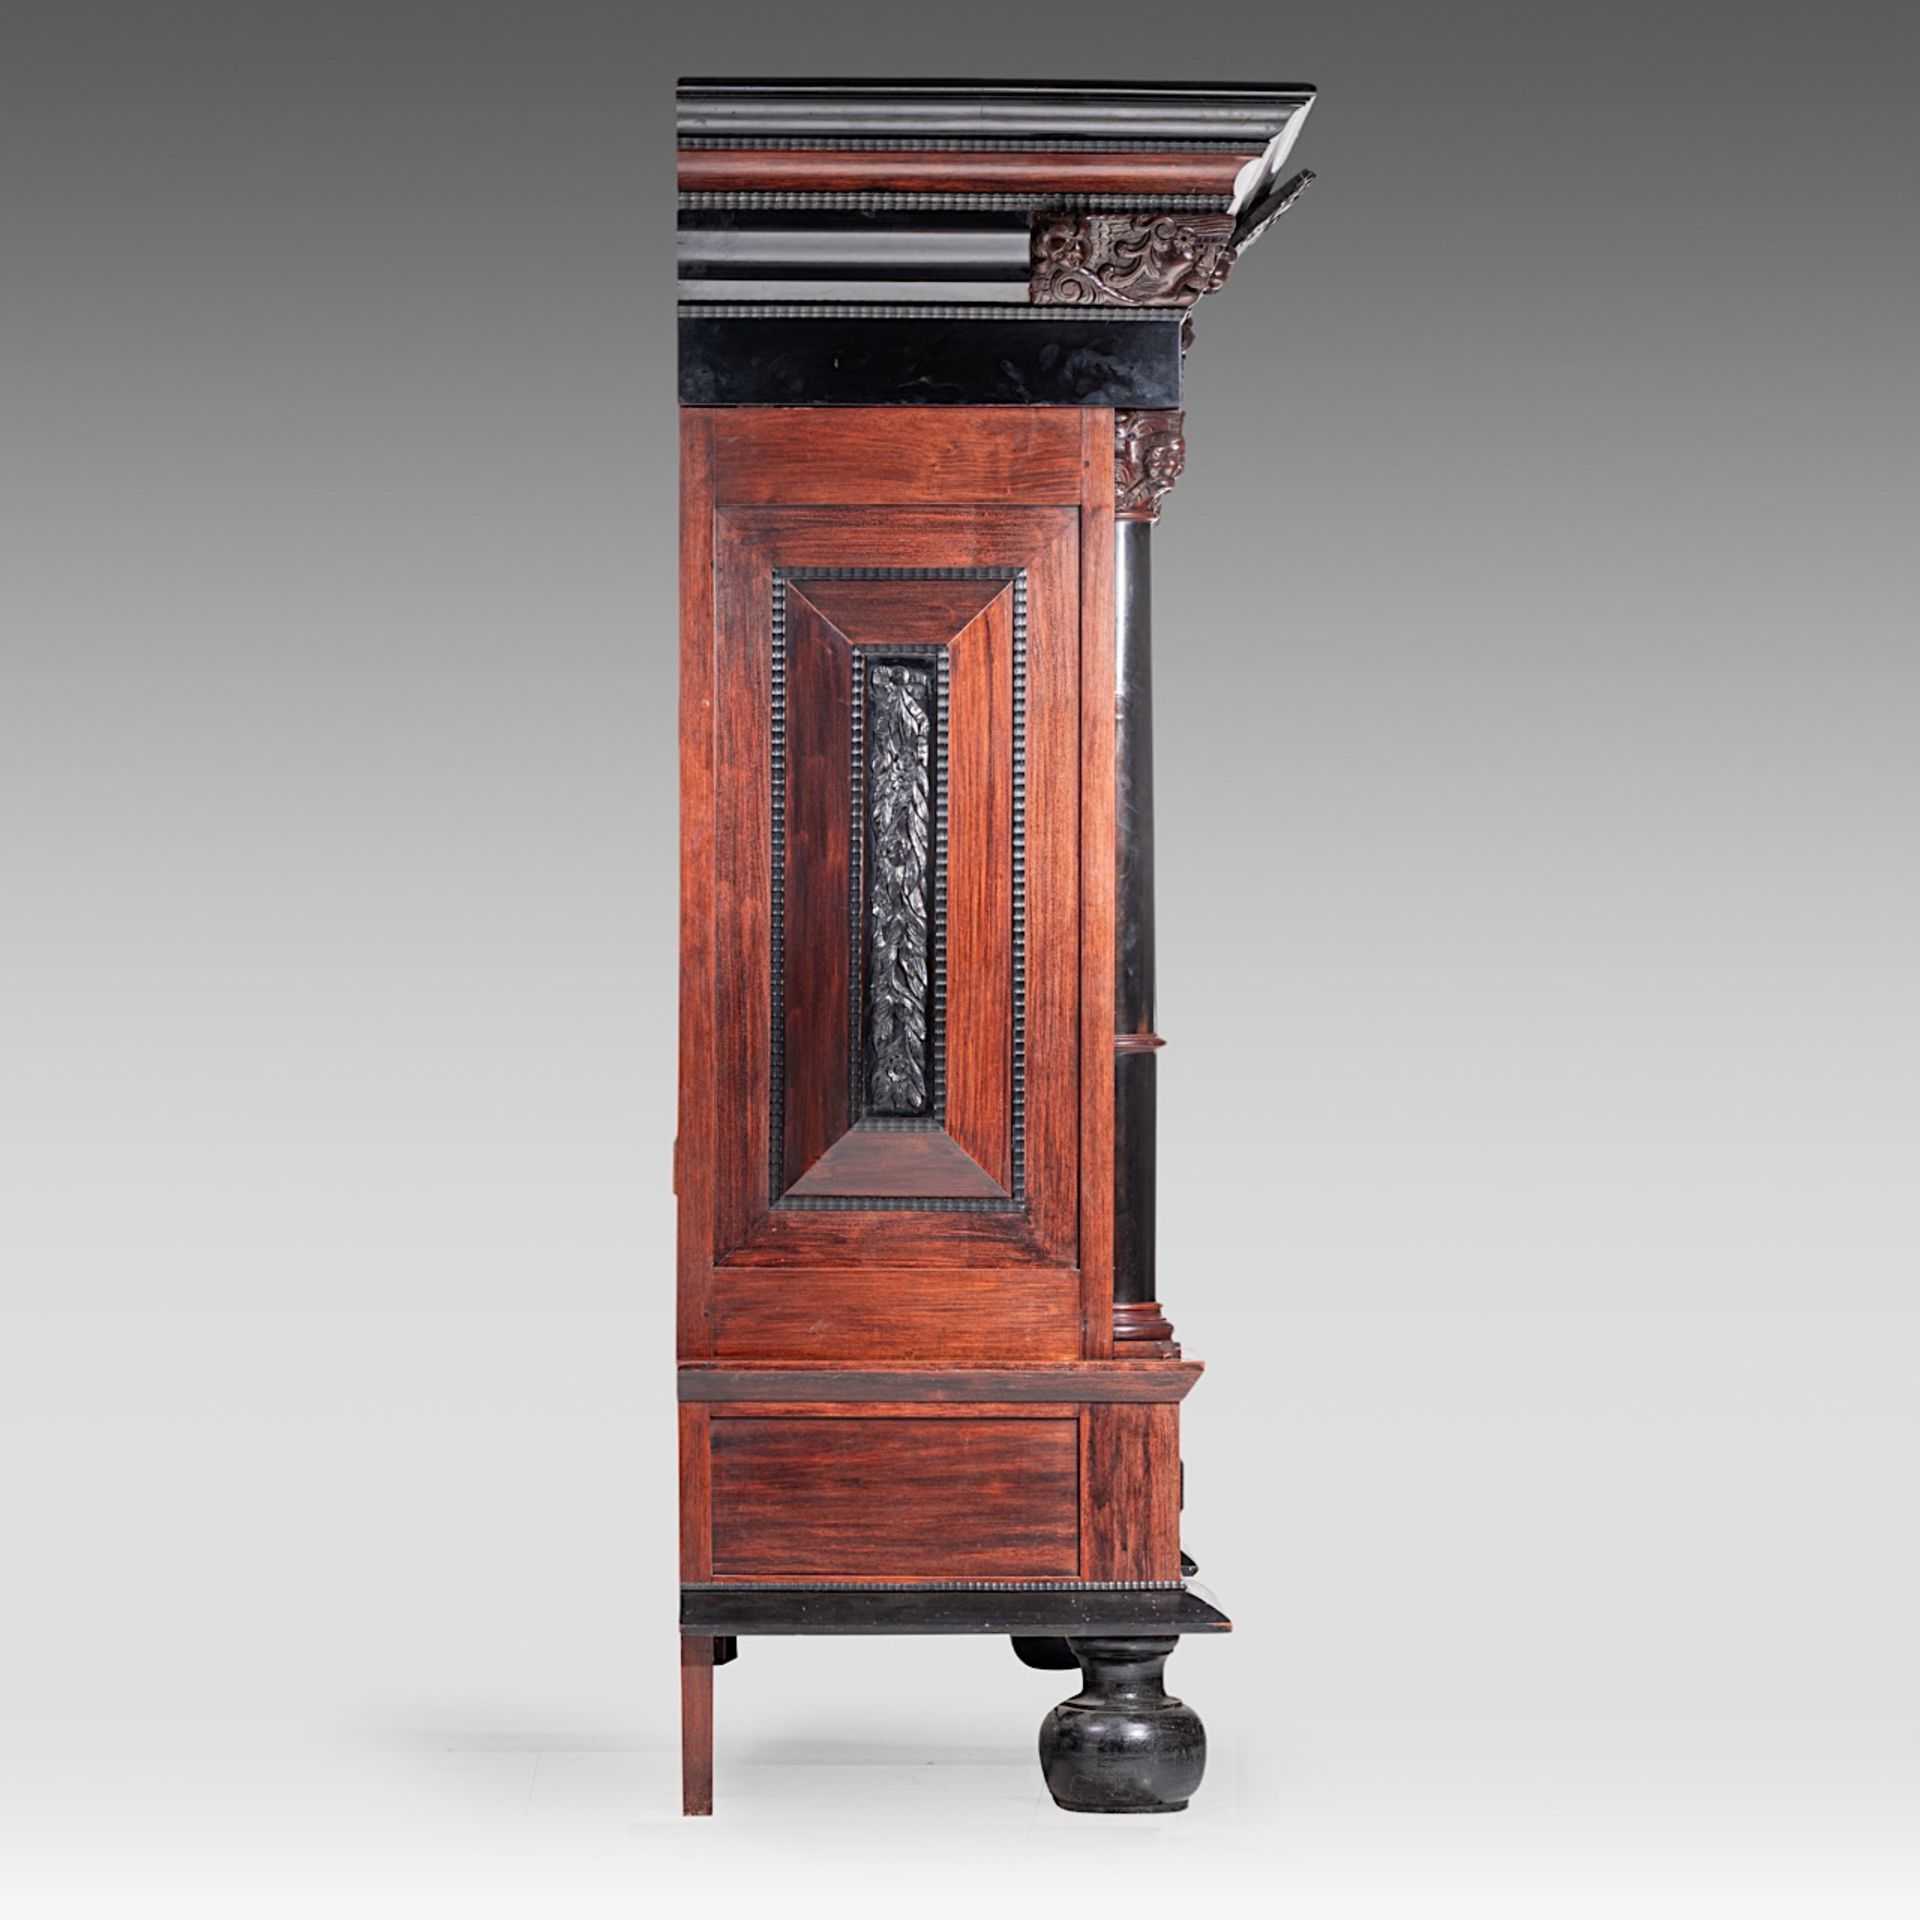 A large Baroque style rosewood and ebony cupboard, H 235 - W 200 - D 85 cm - Image 5 of 6